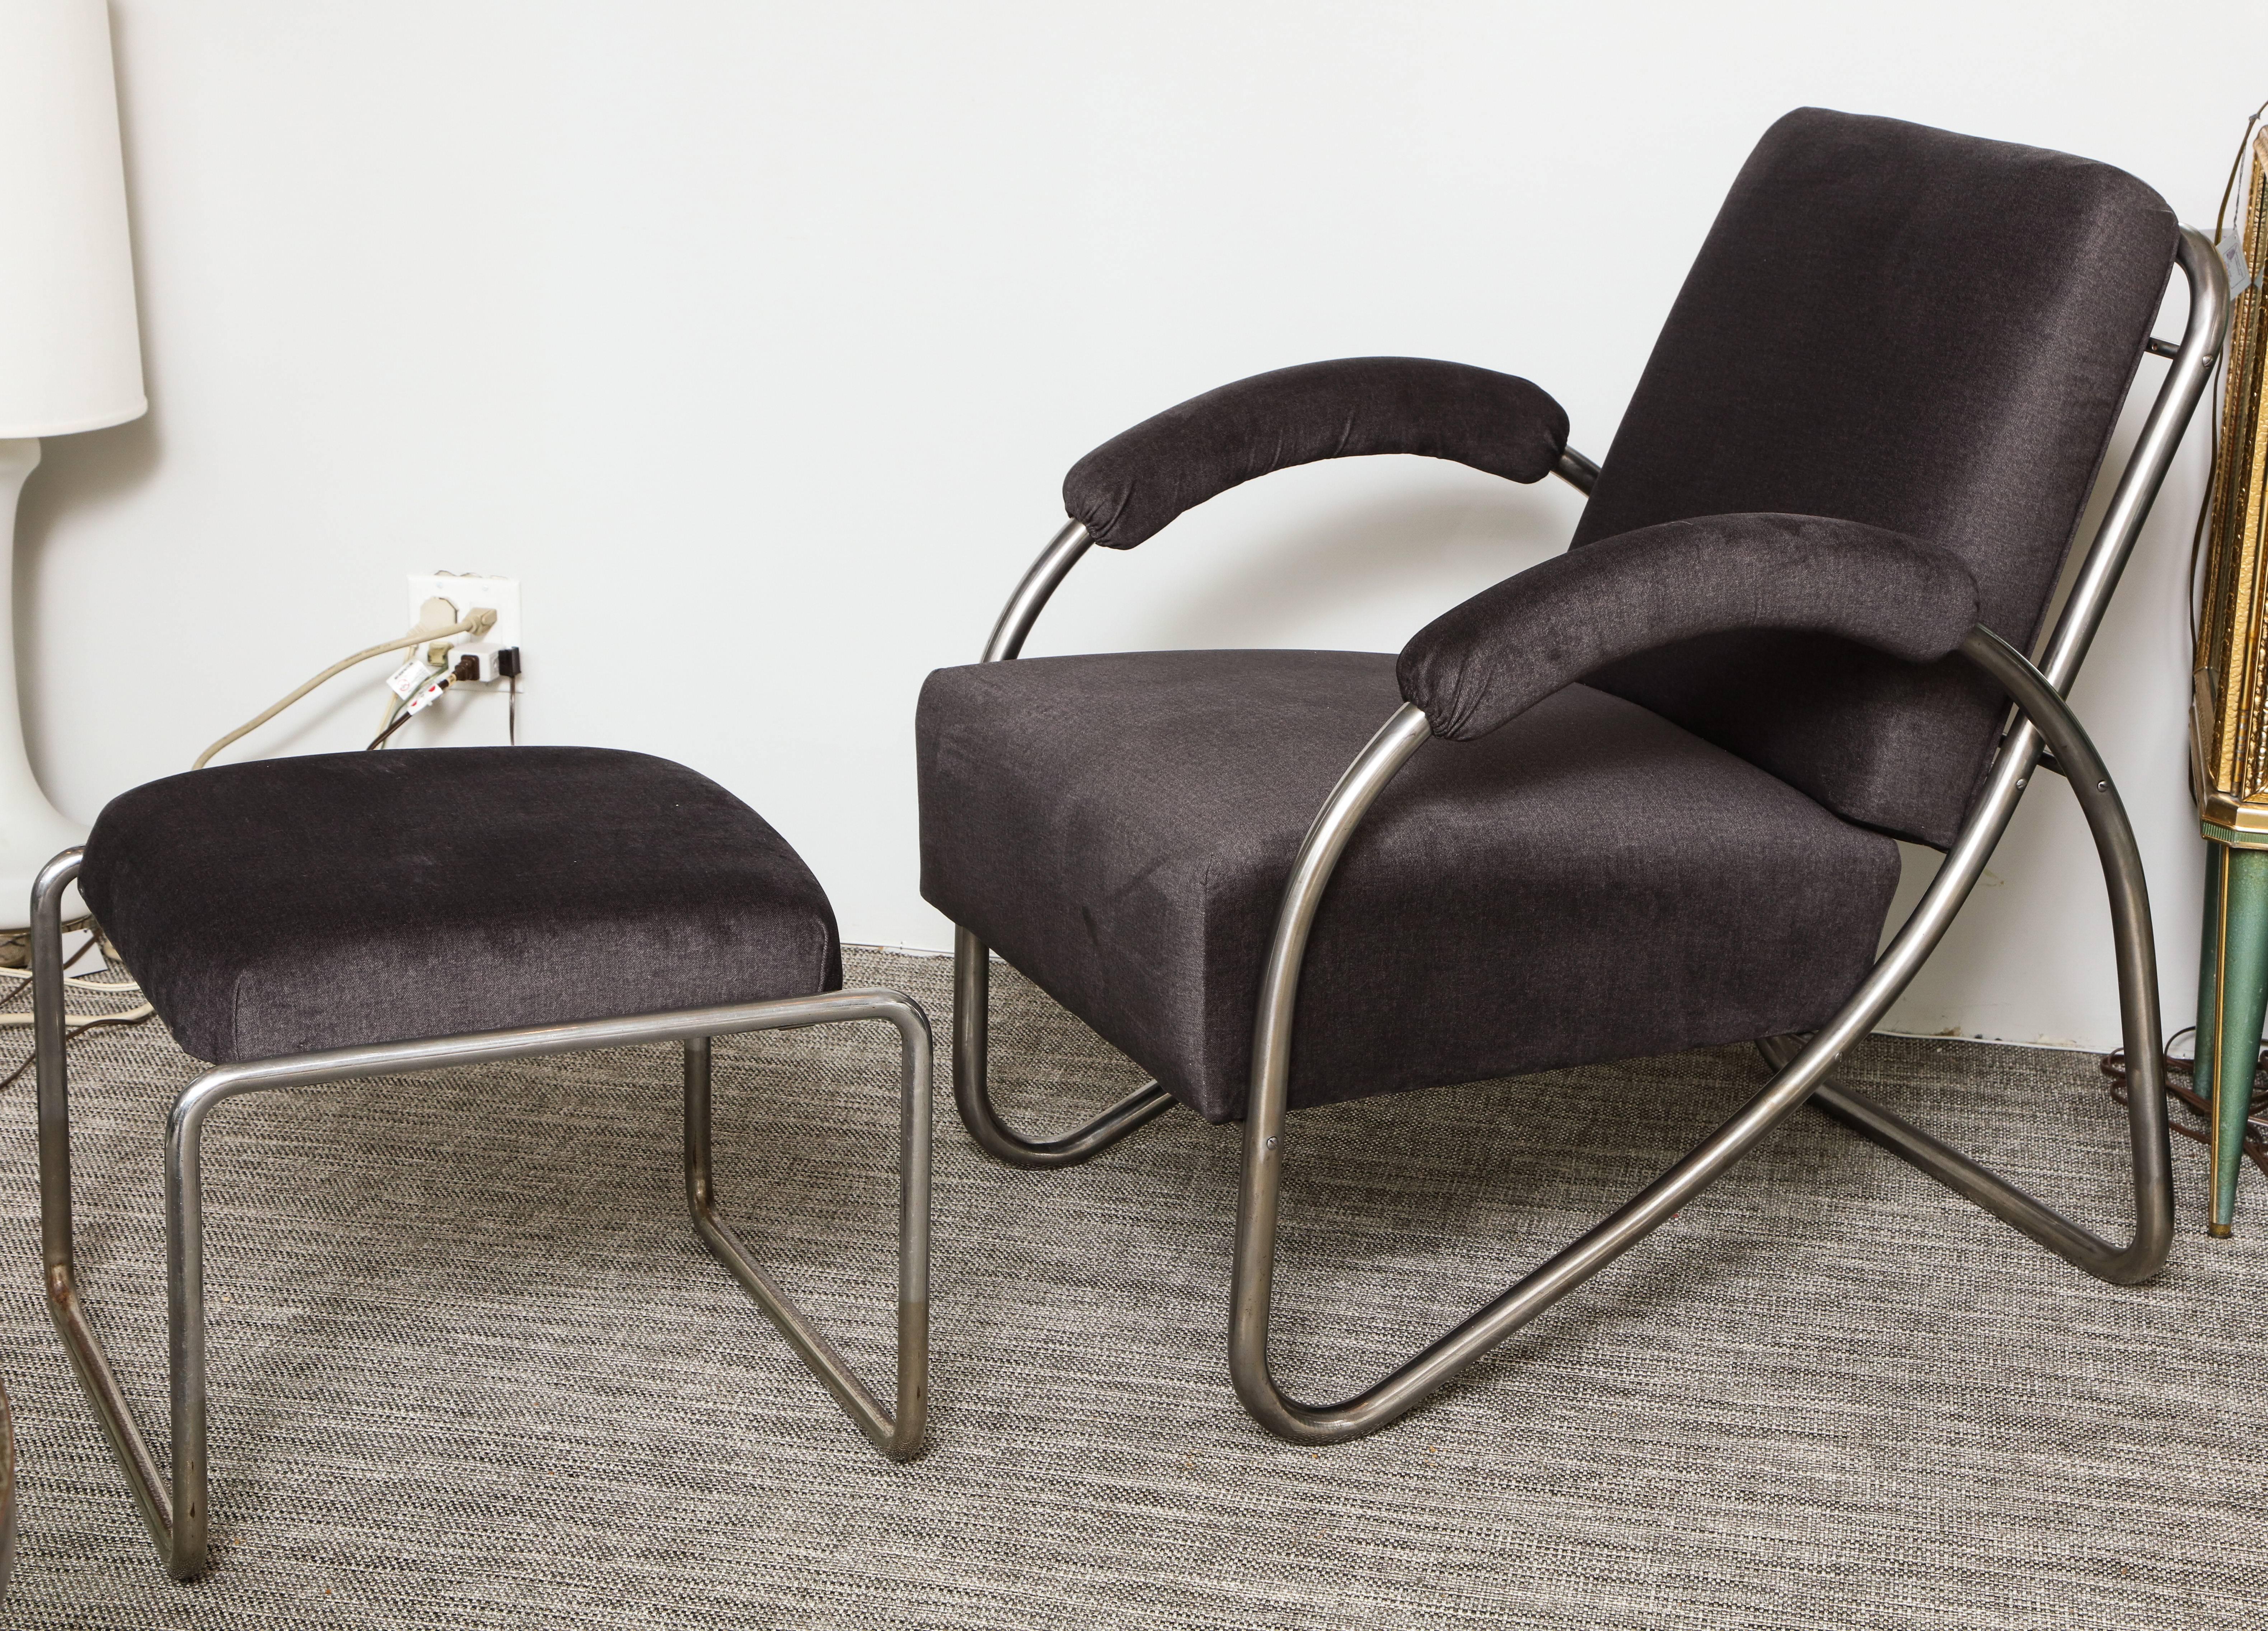 A fantastic pair of period Art Deco lounge chairs made in tubular steel with a design that appears as one continuous line throughout. They are very comfortable and have a slight spring to them due to the excellent design.  In the 1931 Desta Stahl